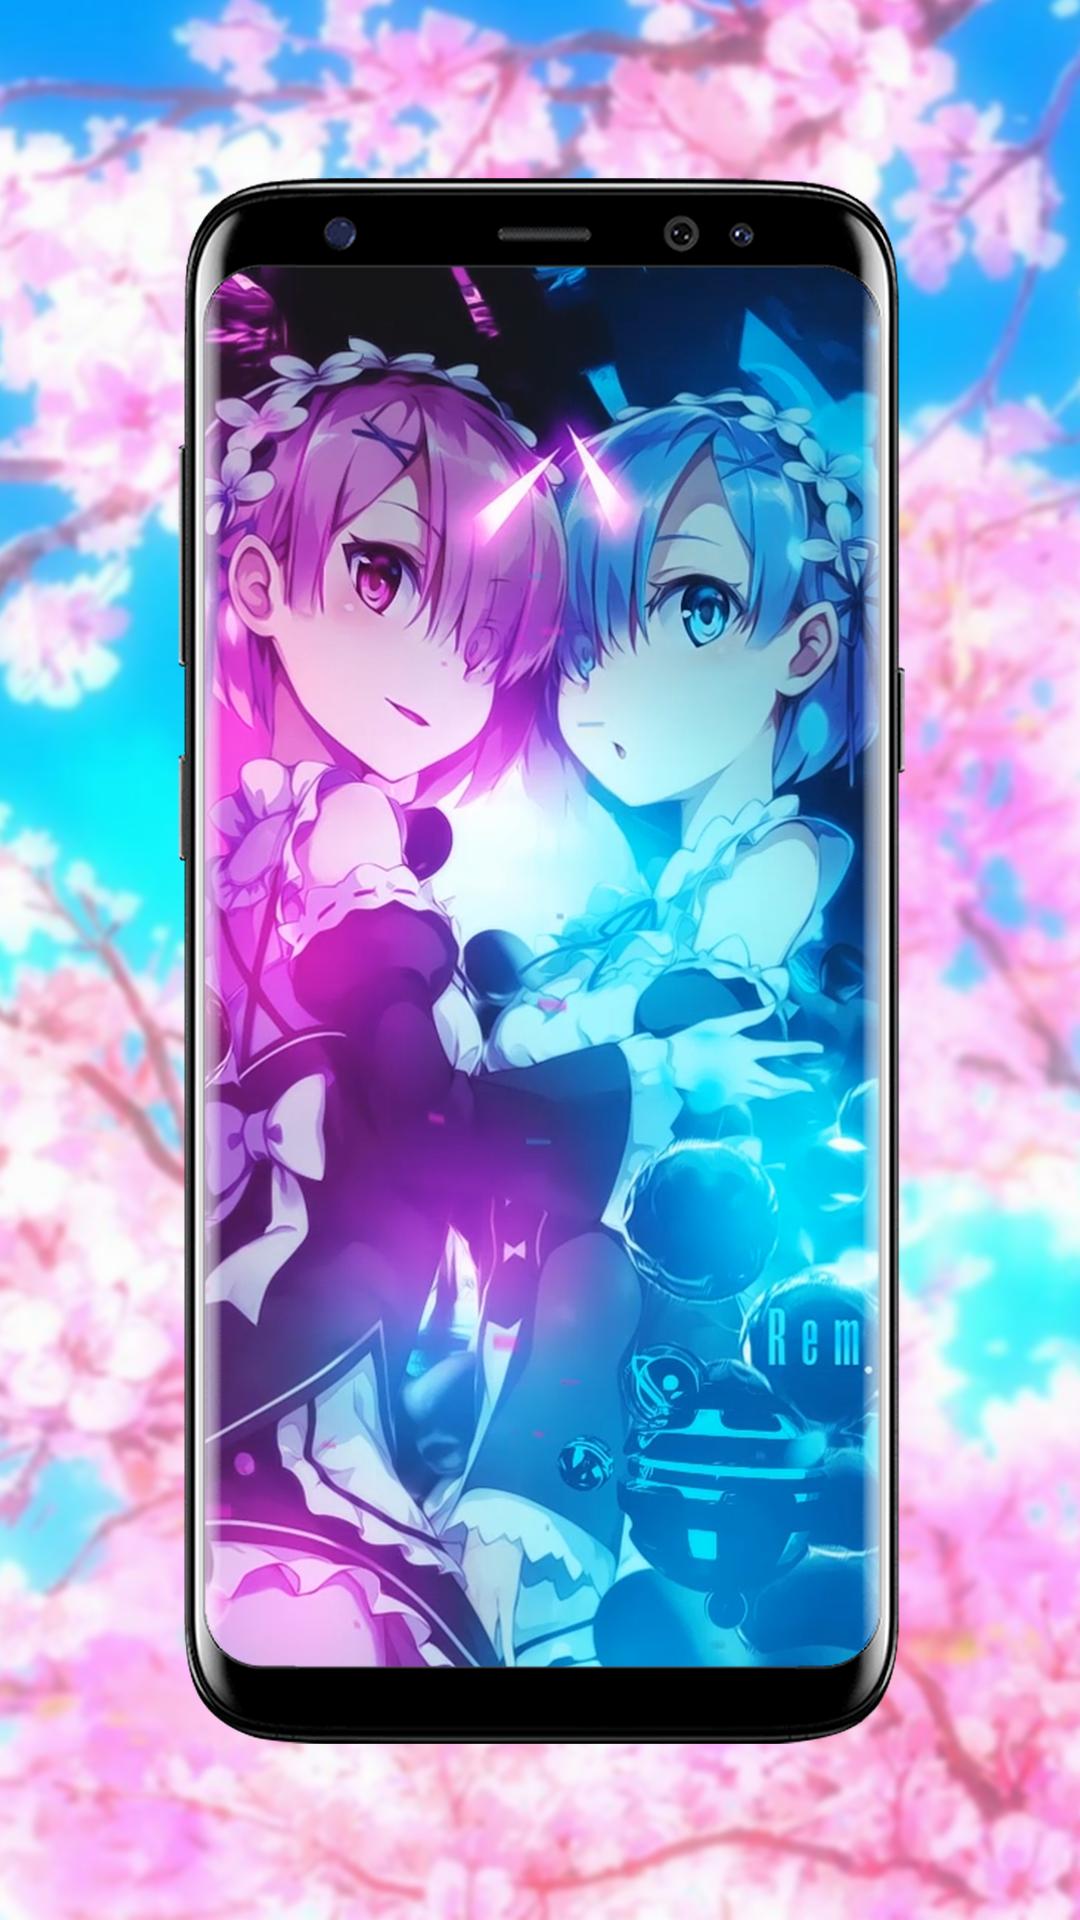 Rem And Ram Anime Live Wallpaper For Android Apk Download